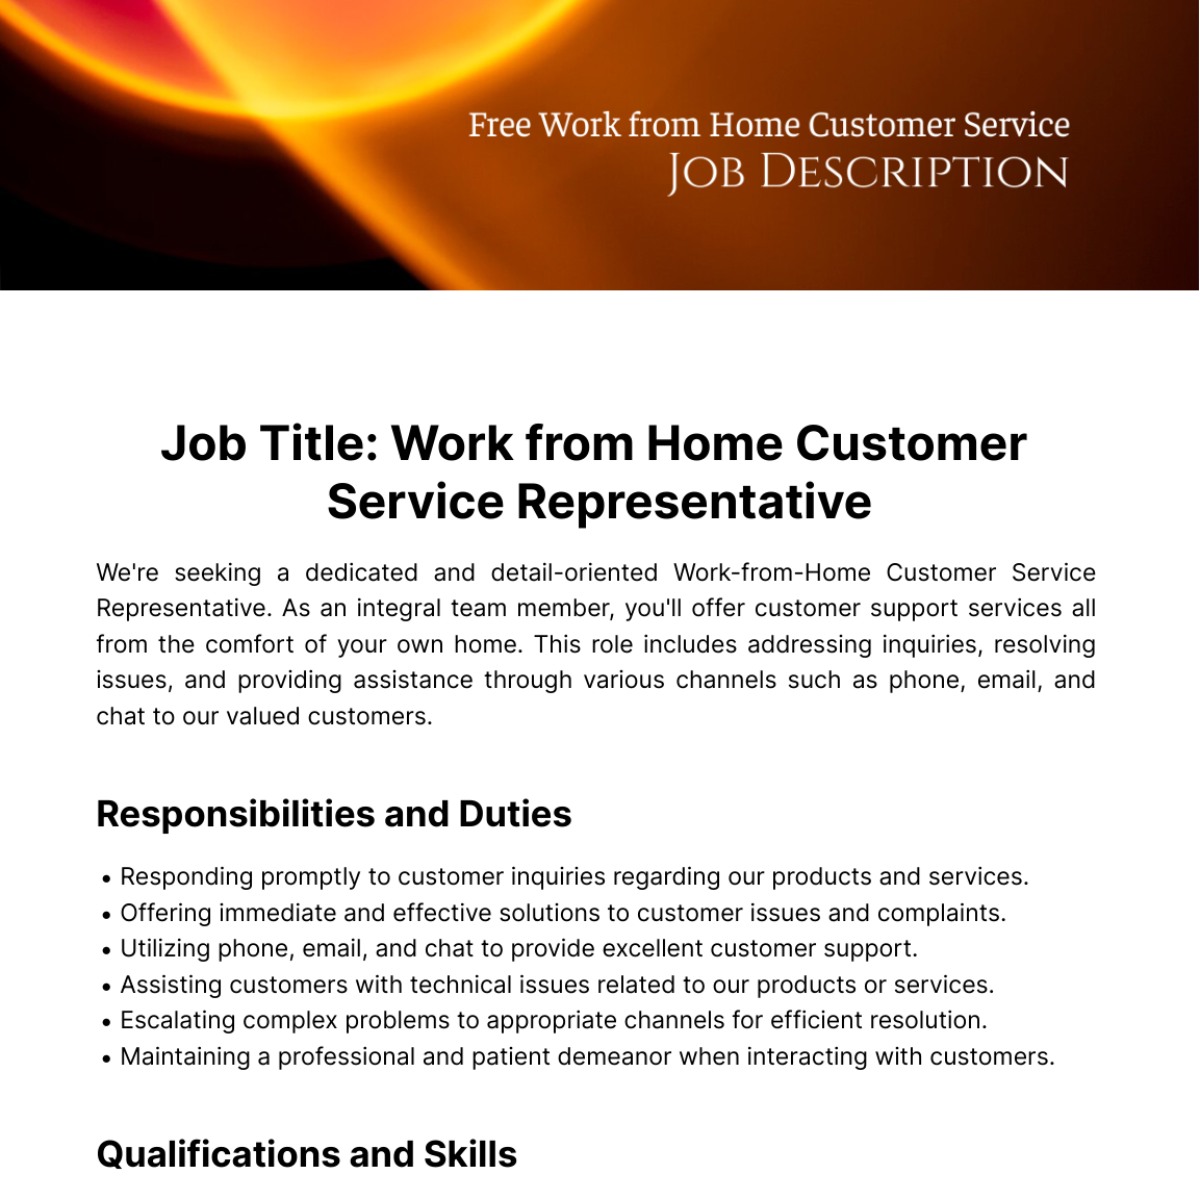 Free Work from Home Customer Service Job Description Template